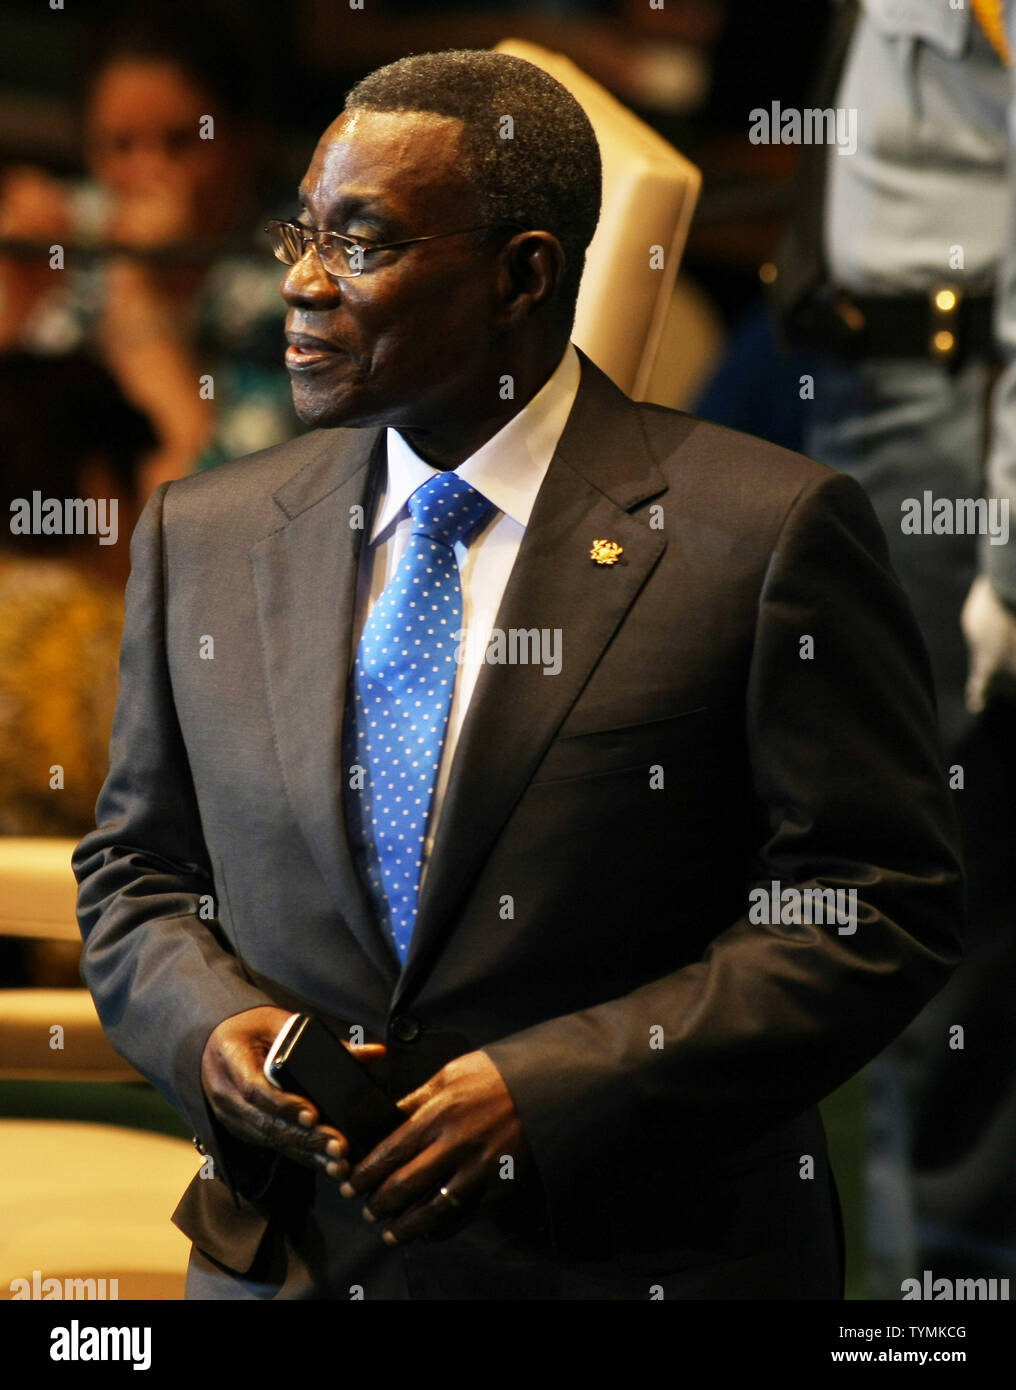 John Evans Atta Mills, president of Ghana, addresses the 66th session of the United Nations General Assembly at the UN on September 23, 2011 in New York City.     UPI/Monika Graff Stock Photo